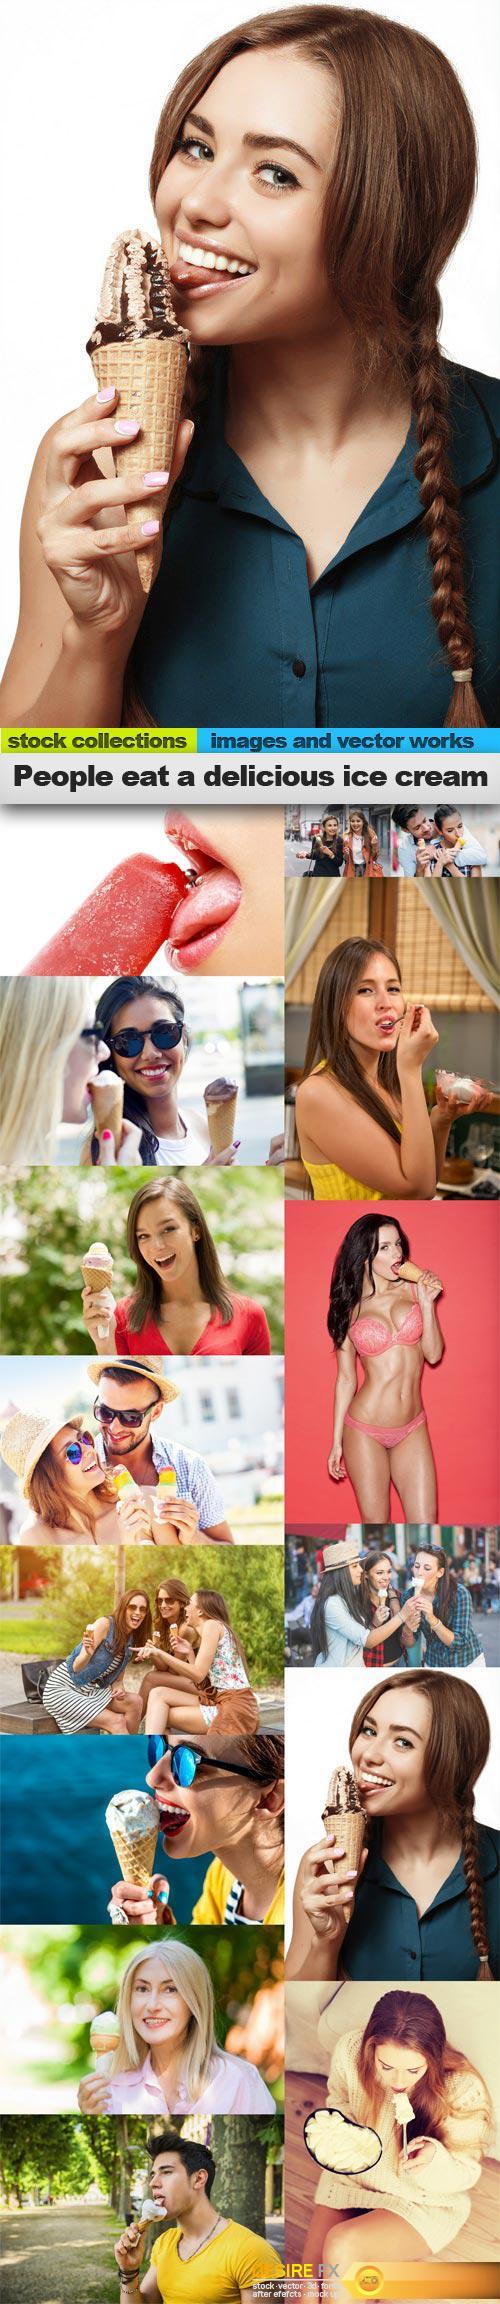 People eat a delicious ice cream, 15 x UHQ JPEG